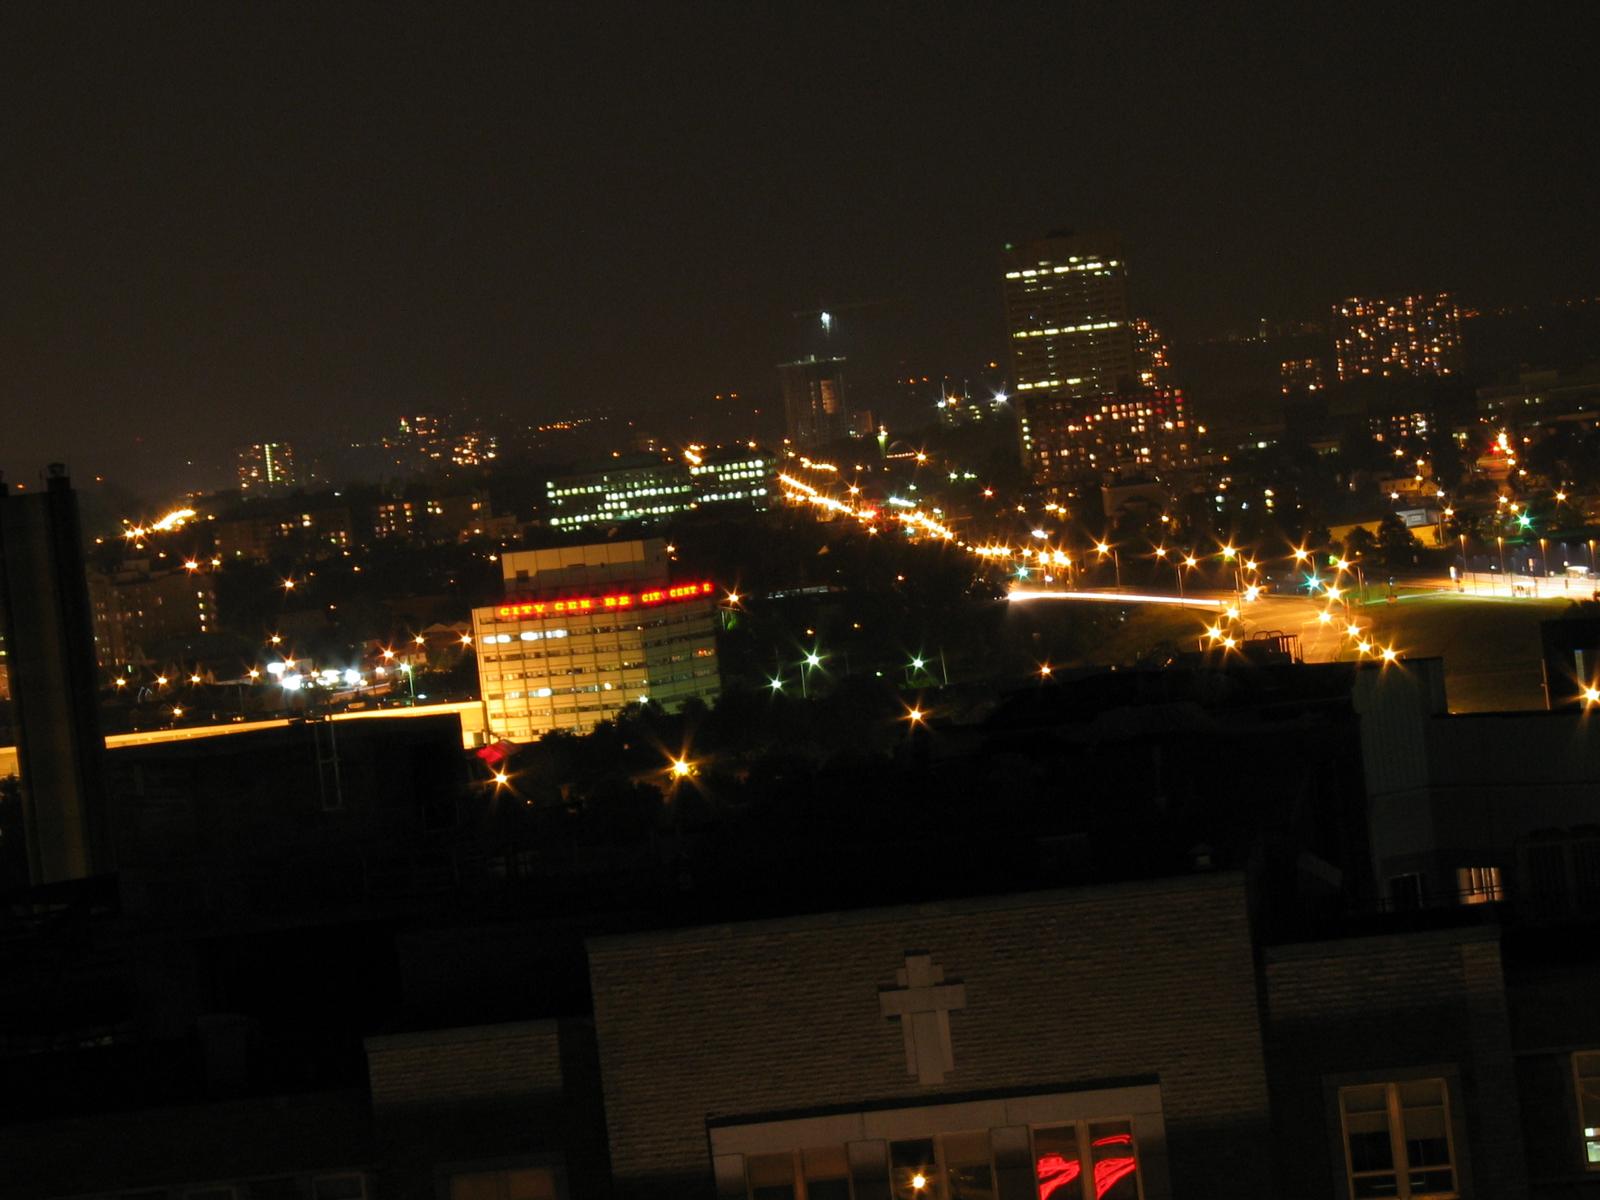 prolonged exposure: the view from my place @night